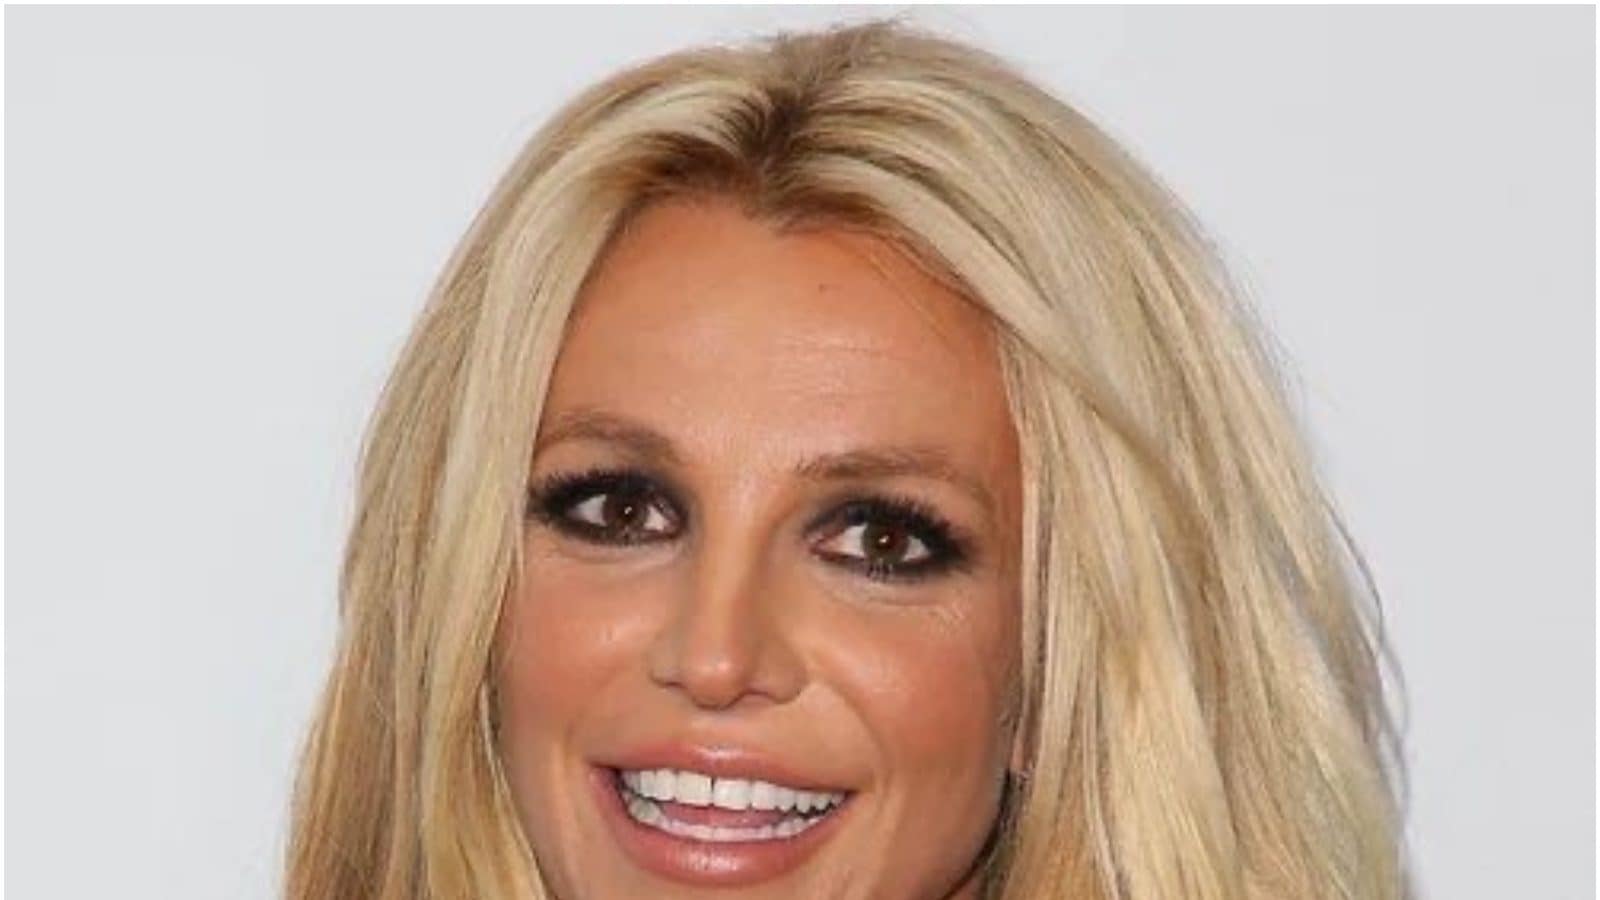 Britney Spears Shared a Long Yet Cryptic Post Before Deleting Her Instagram Account Again